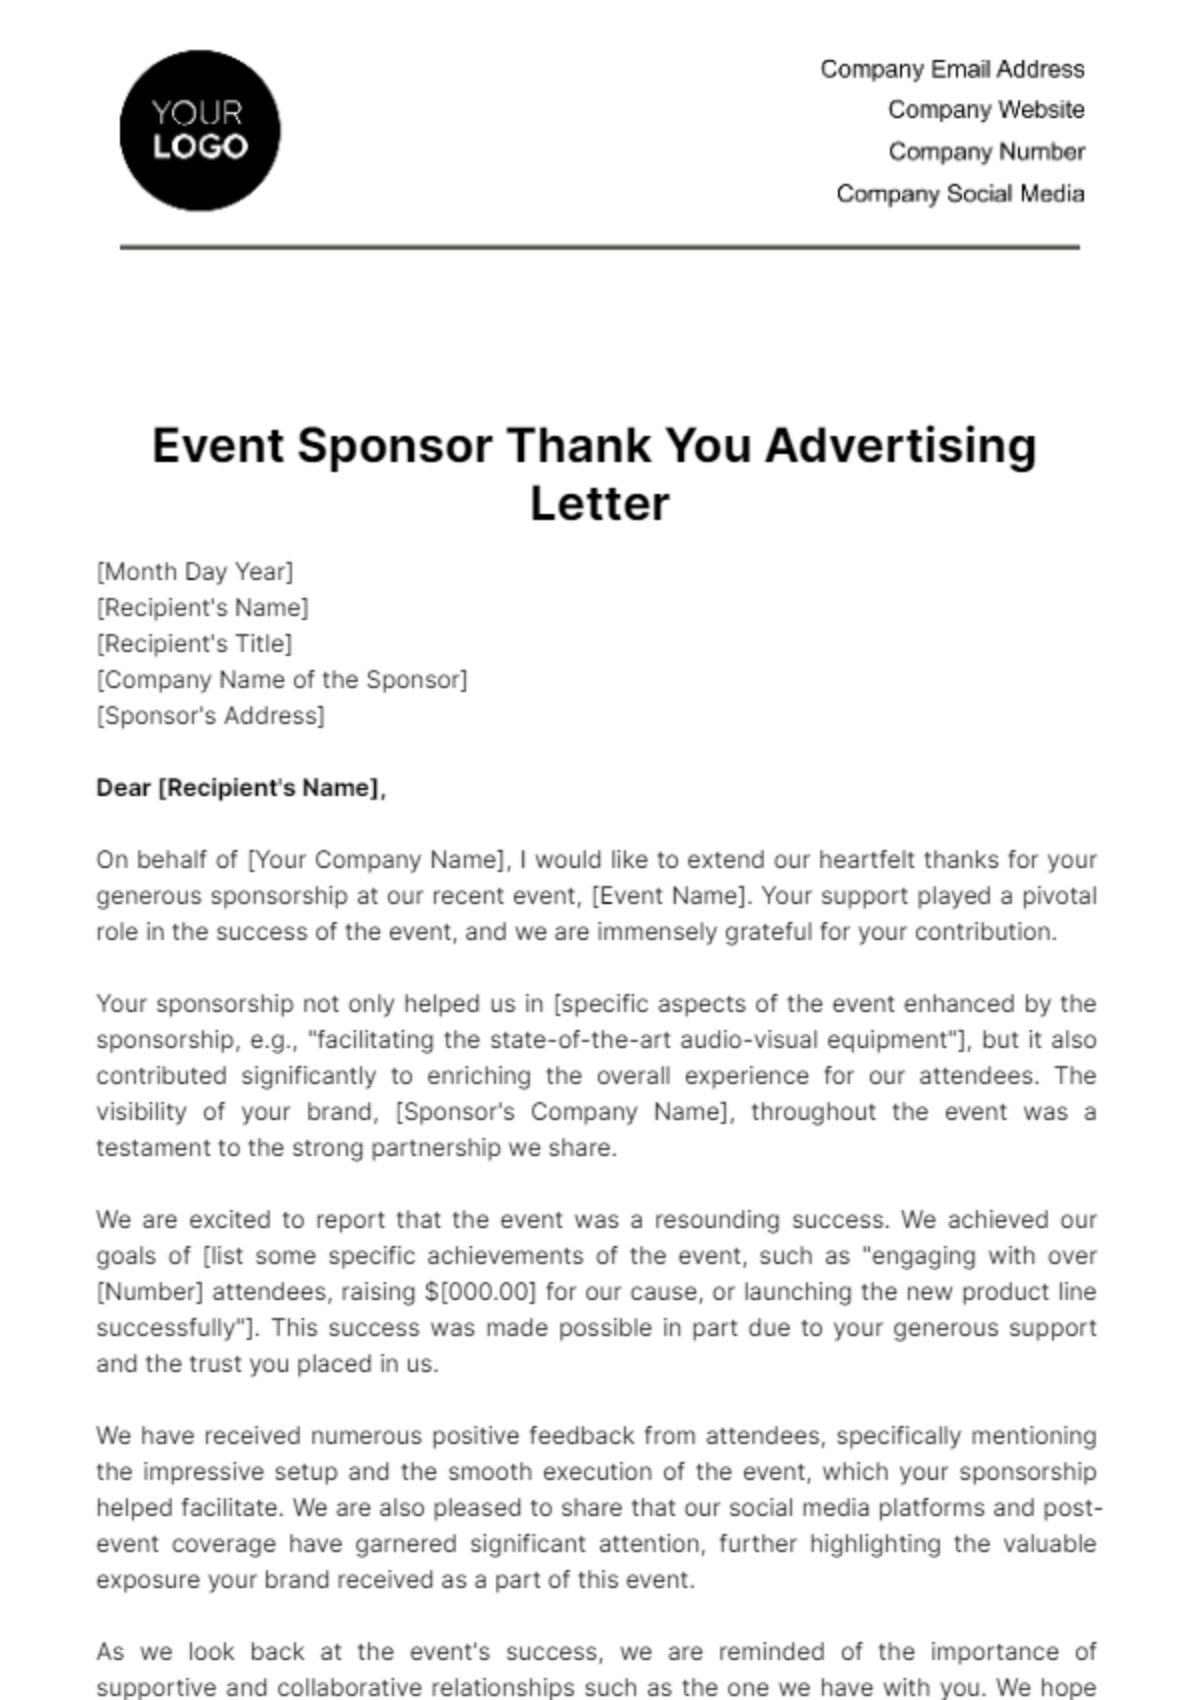 Event Sponsor Thank You Advertising Letter Template